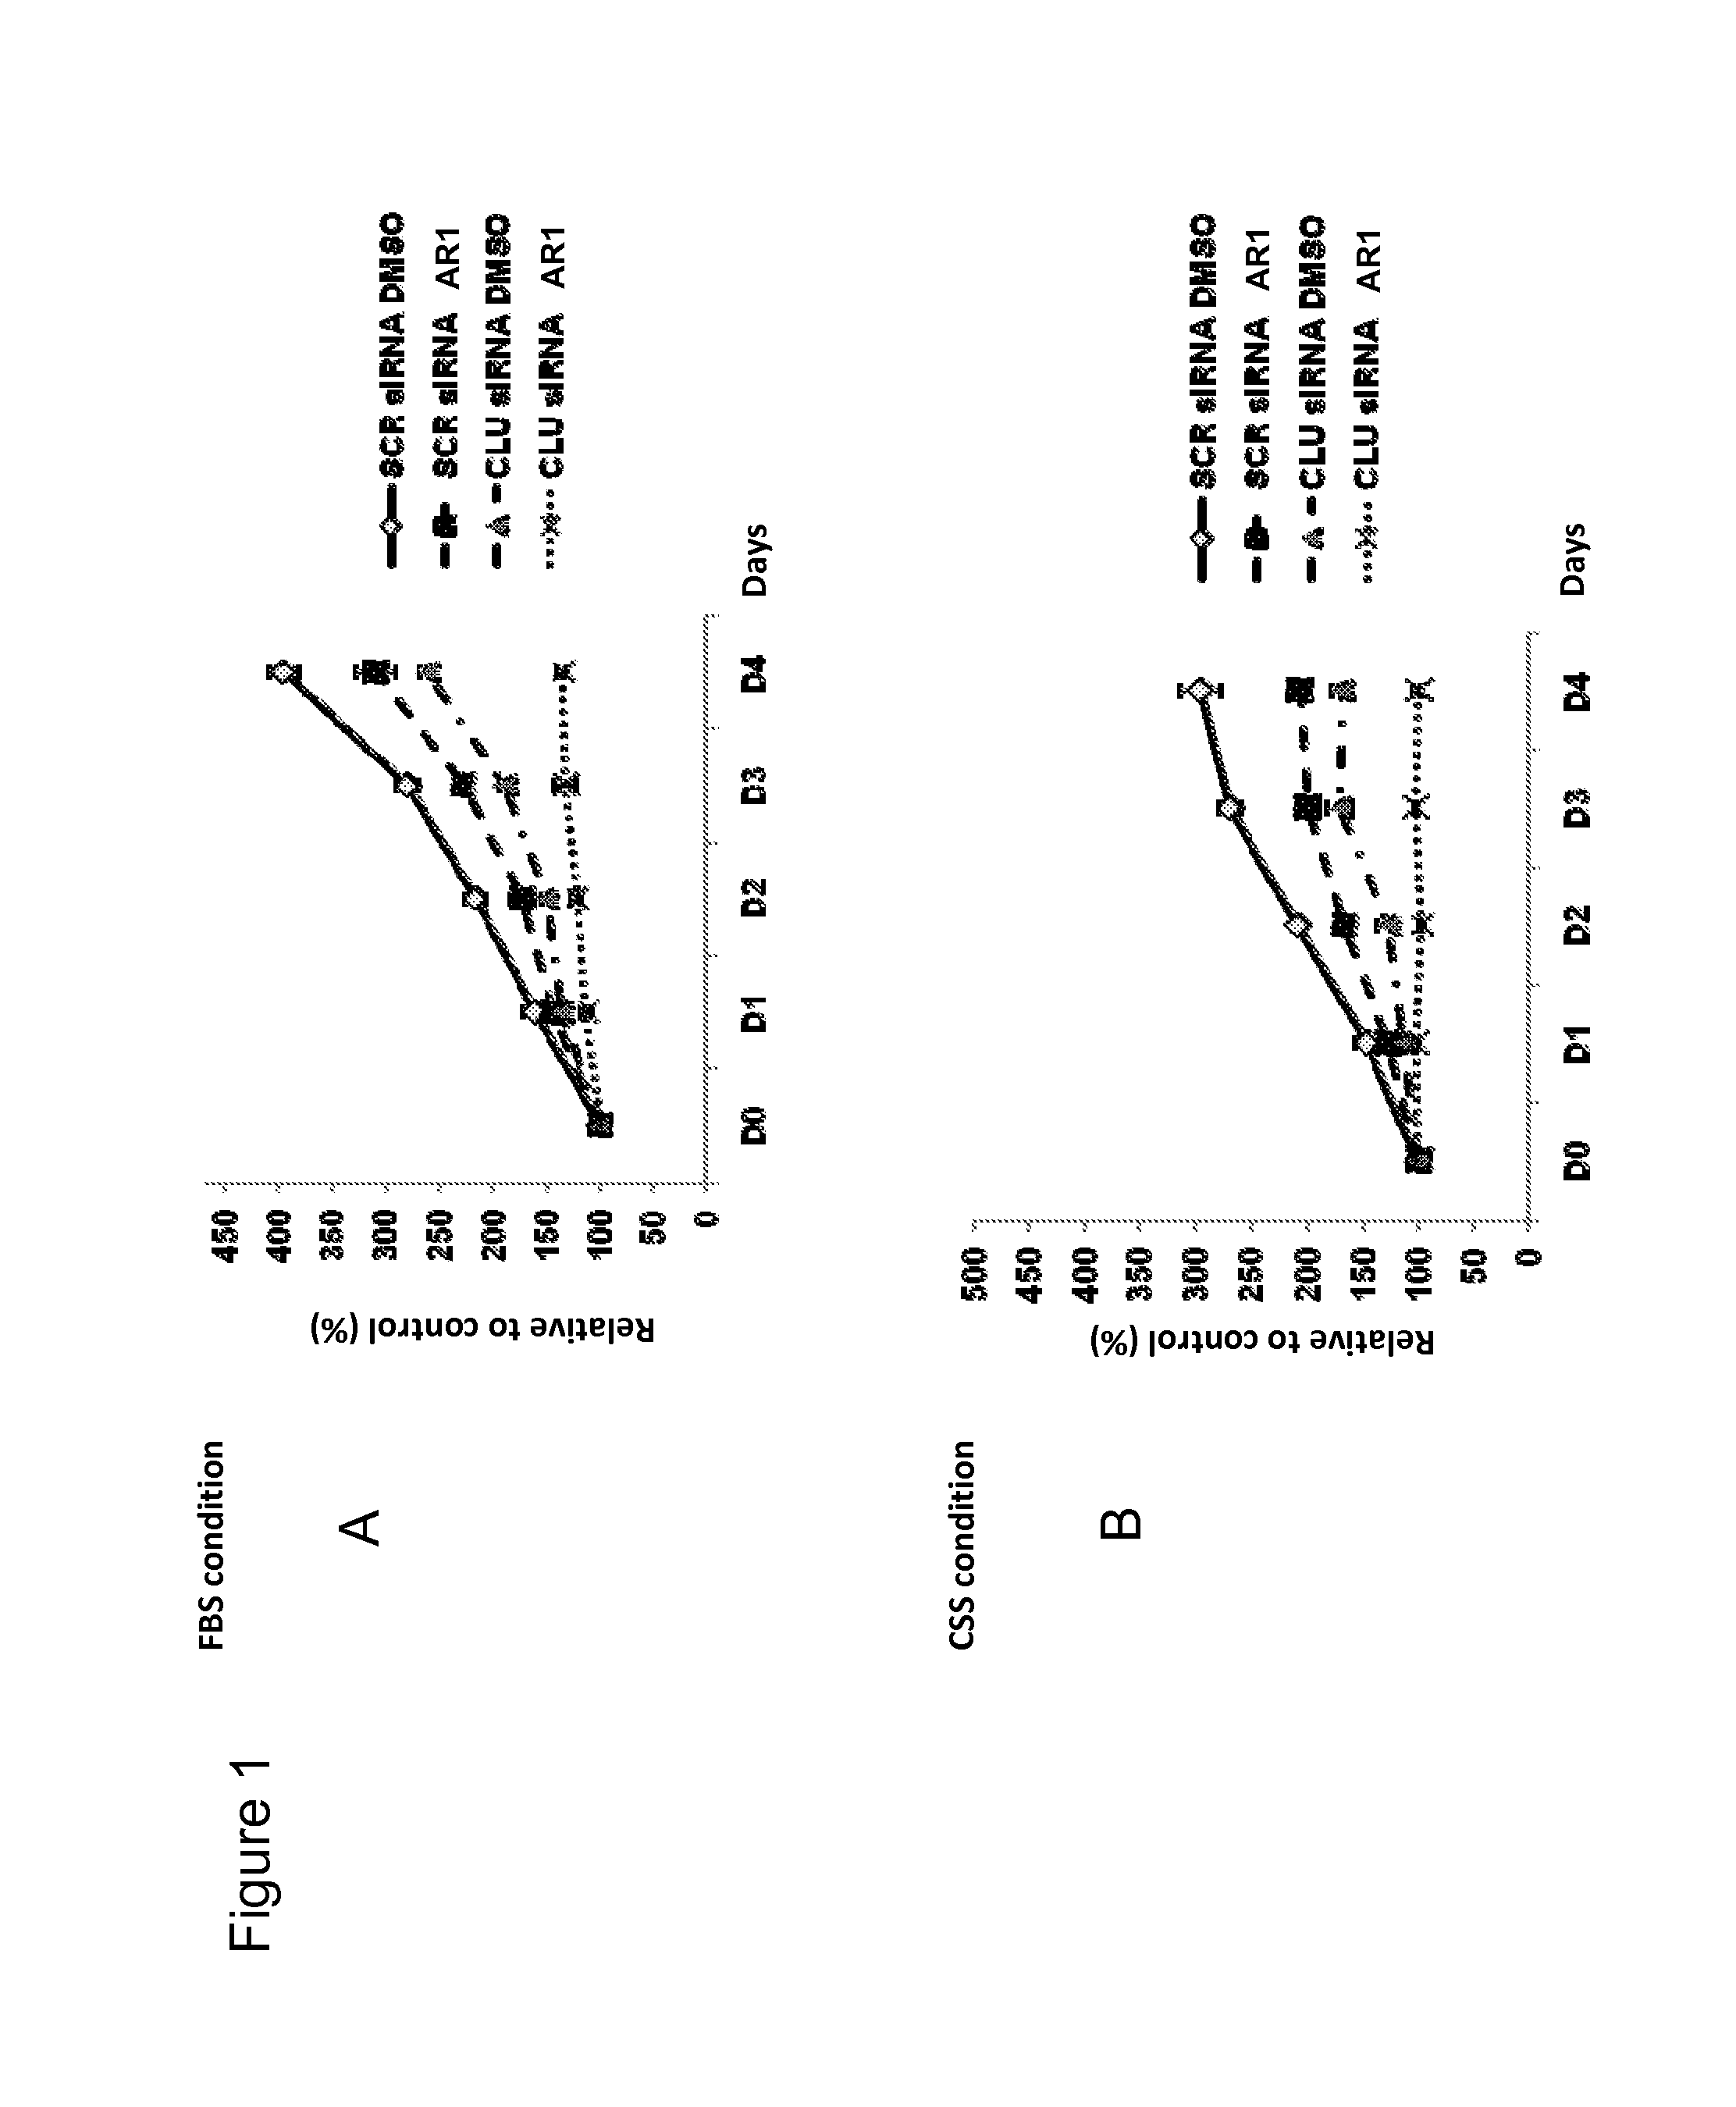 Combination of Anti-clusterin oligonucleotide with androgen                  receptor antagonist for the treatment of prostate cancer